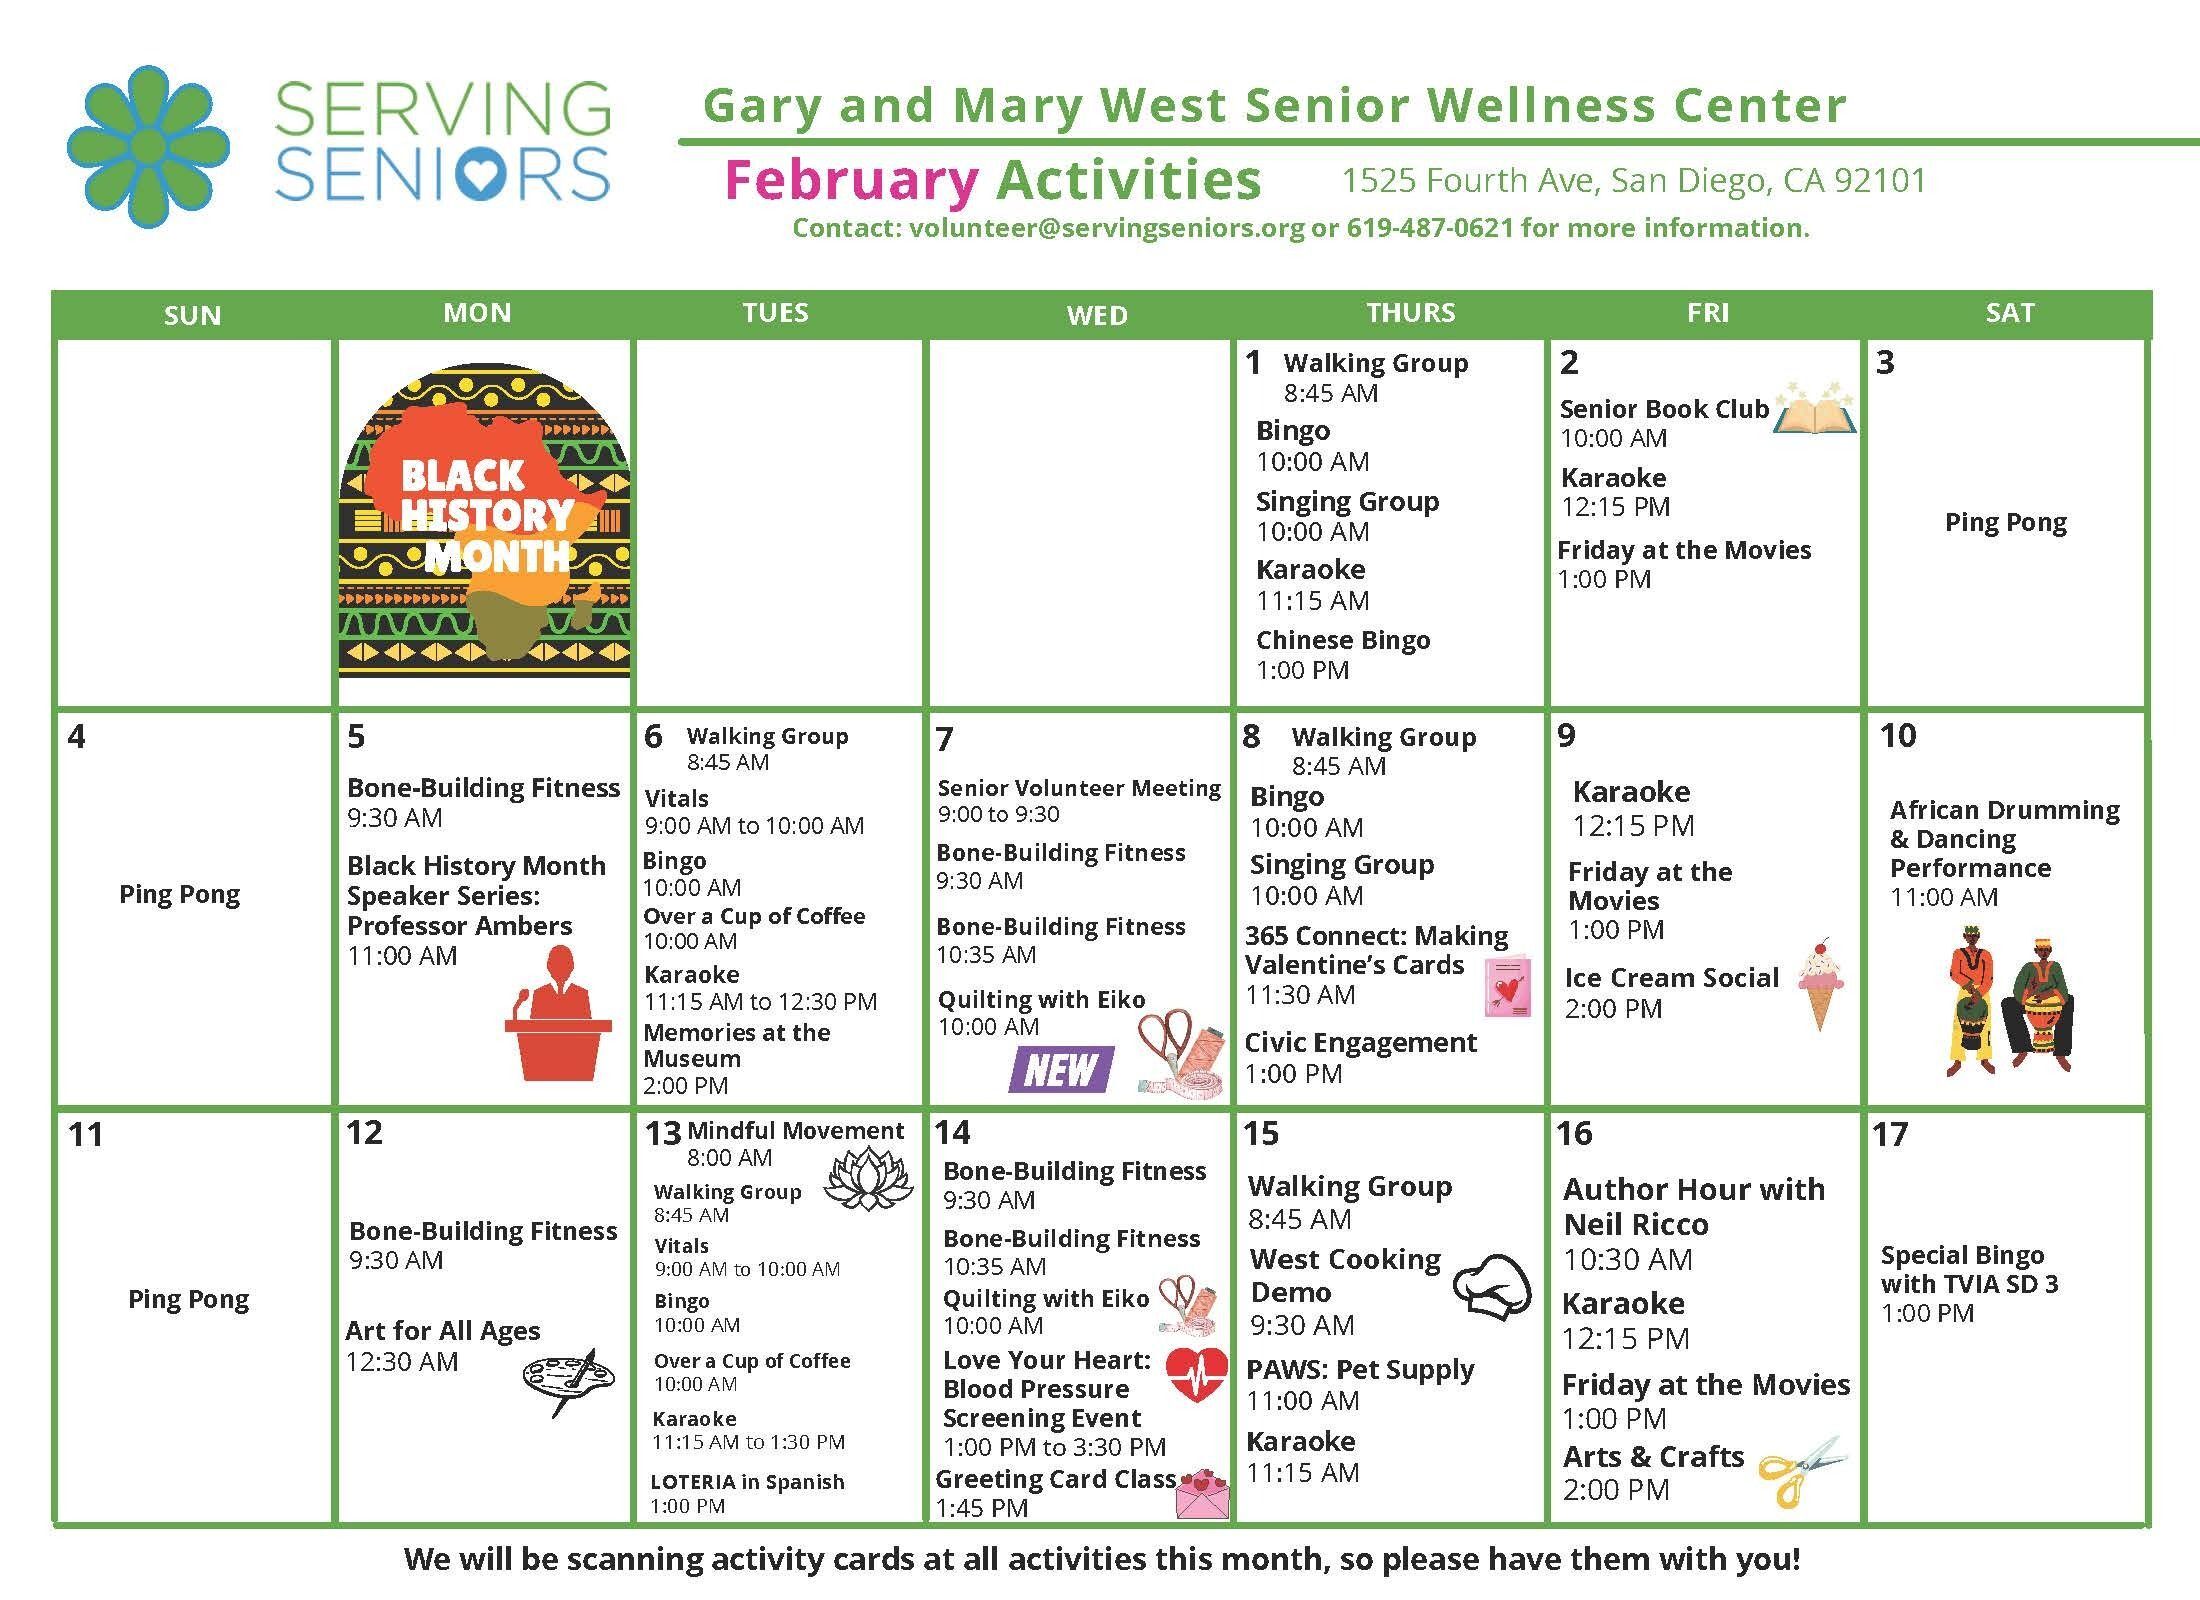 Click to download the Gary and Mary West Senior Wellness Center February Activities Calendar